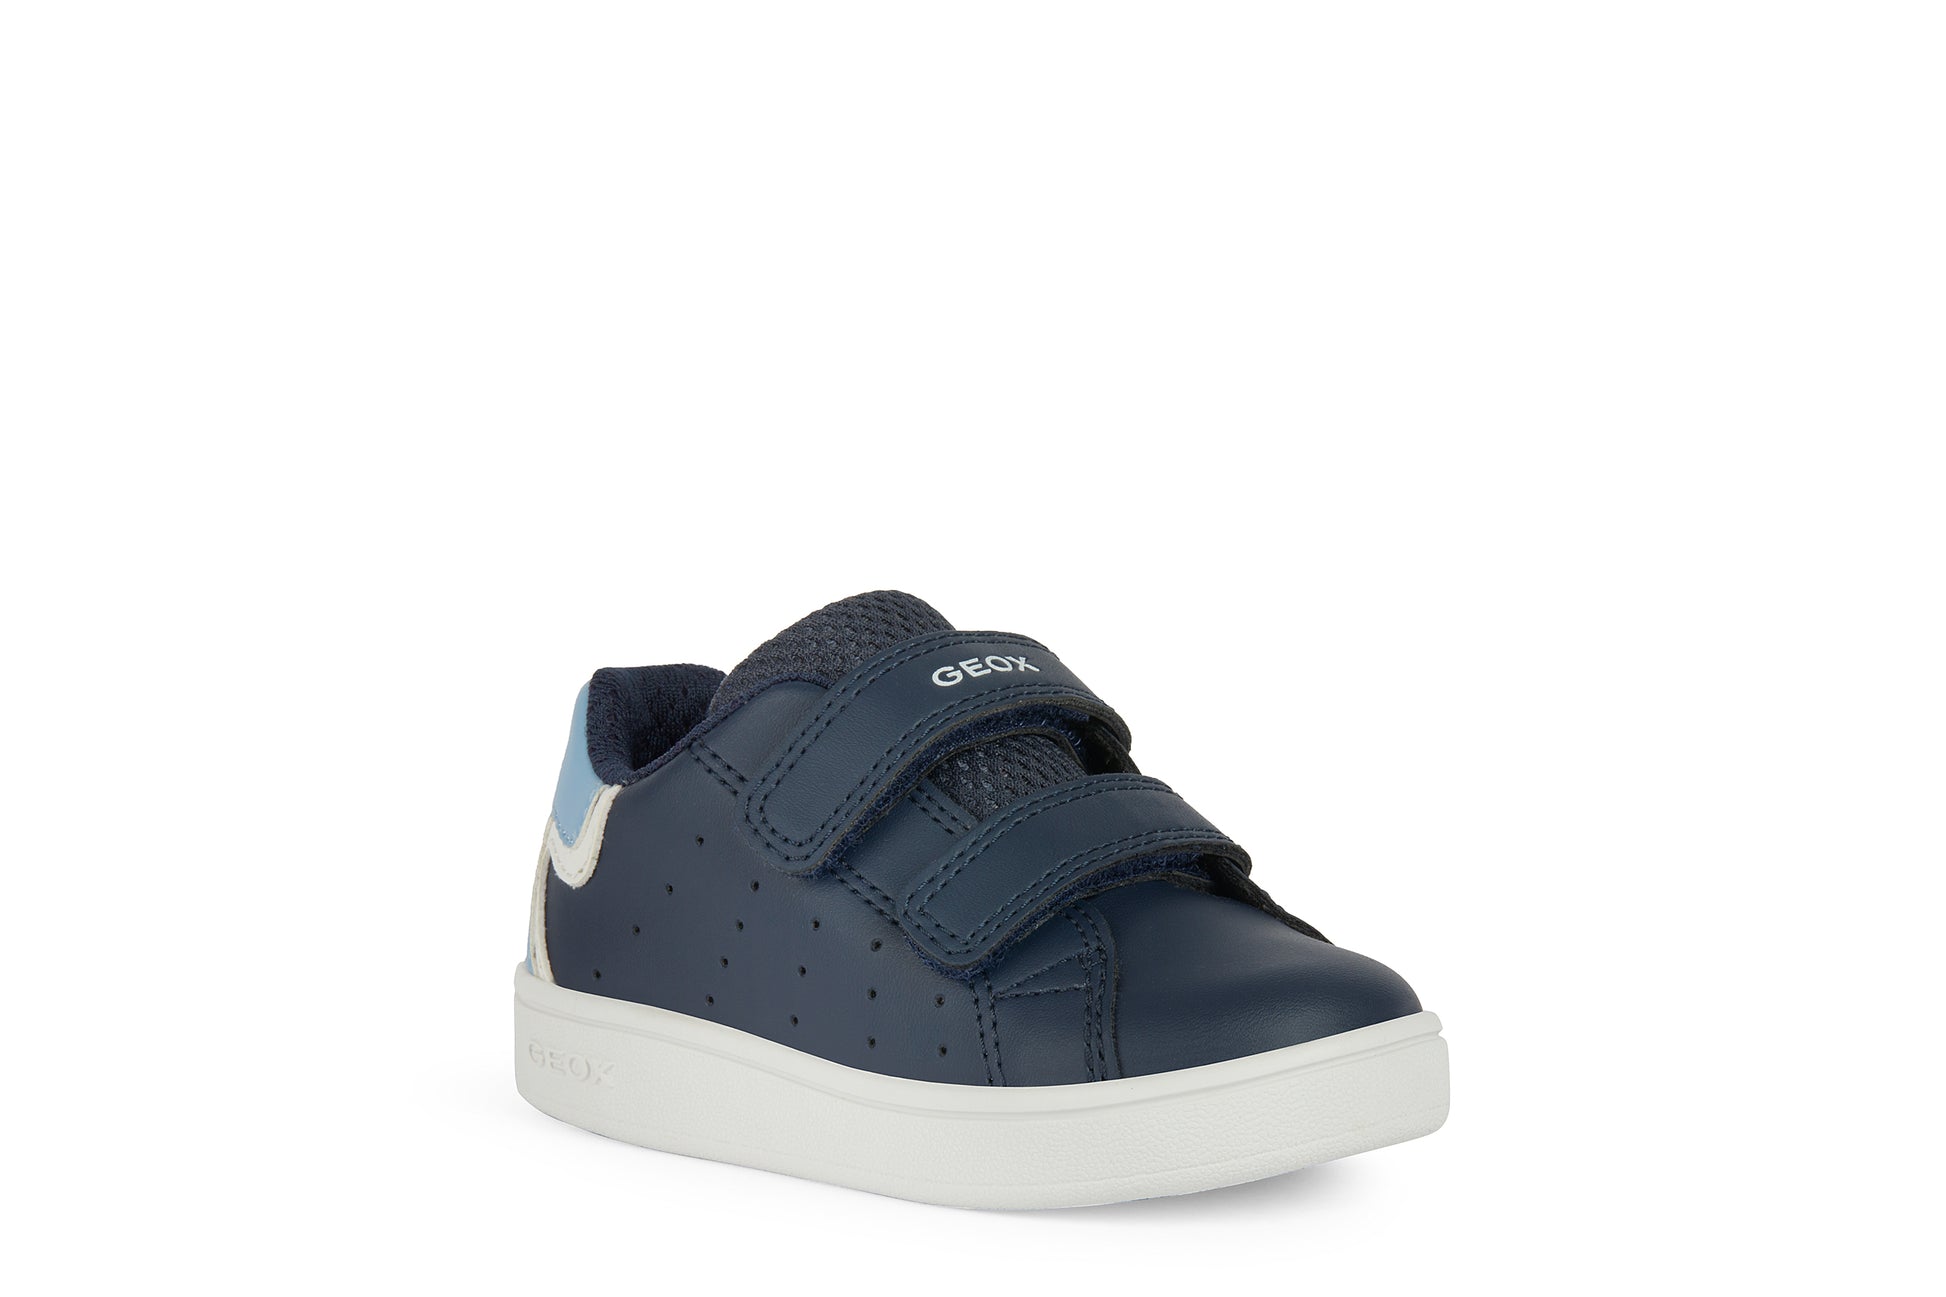 A boys casual shoe by Geox, style B Eclyper, in navy, light blue and white with double velcro fastening. Angled right side view.